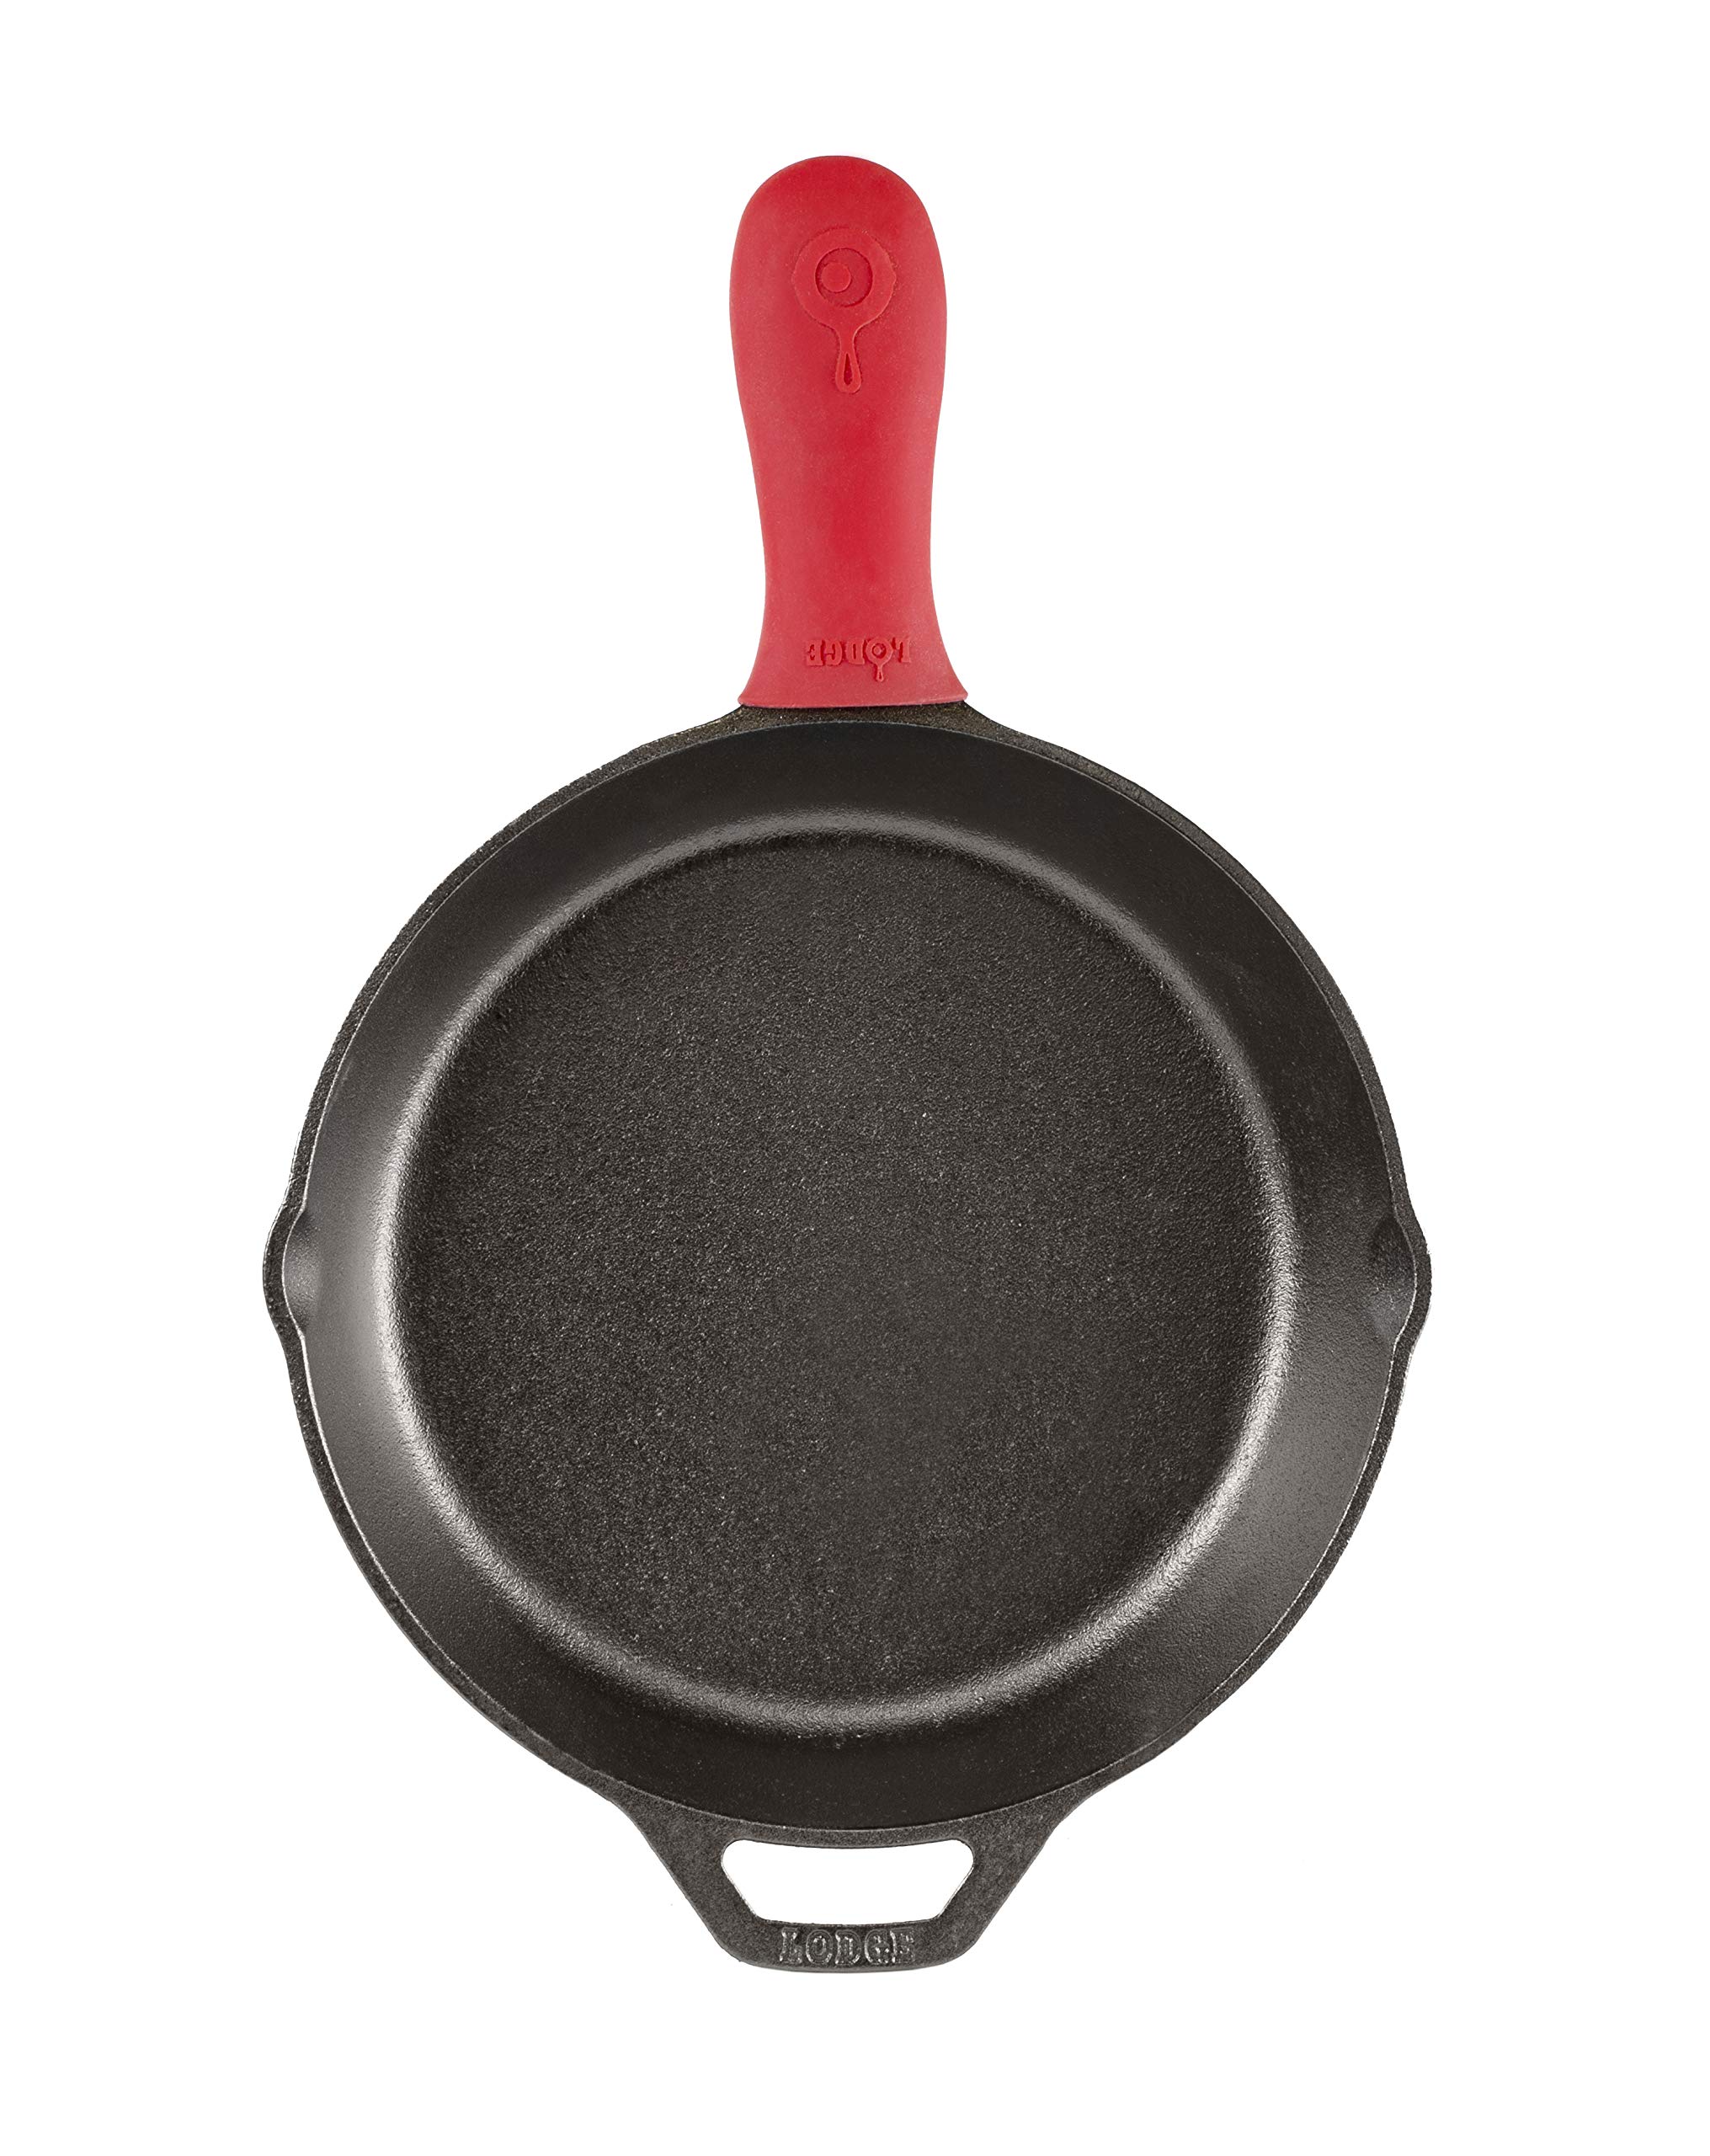 Lodge 13-1/4-Inch Pre-Seasoned Skillet & Silicone Hot Handle Holder - Red Heat Protecting Silicone Handle Cast Iron Skillets with Keyhole Handle